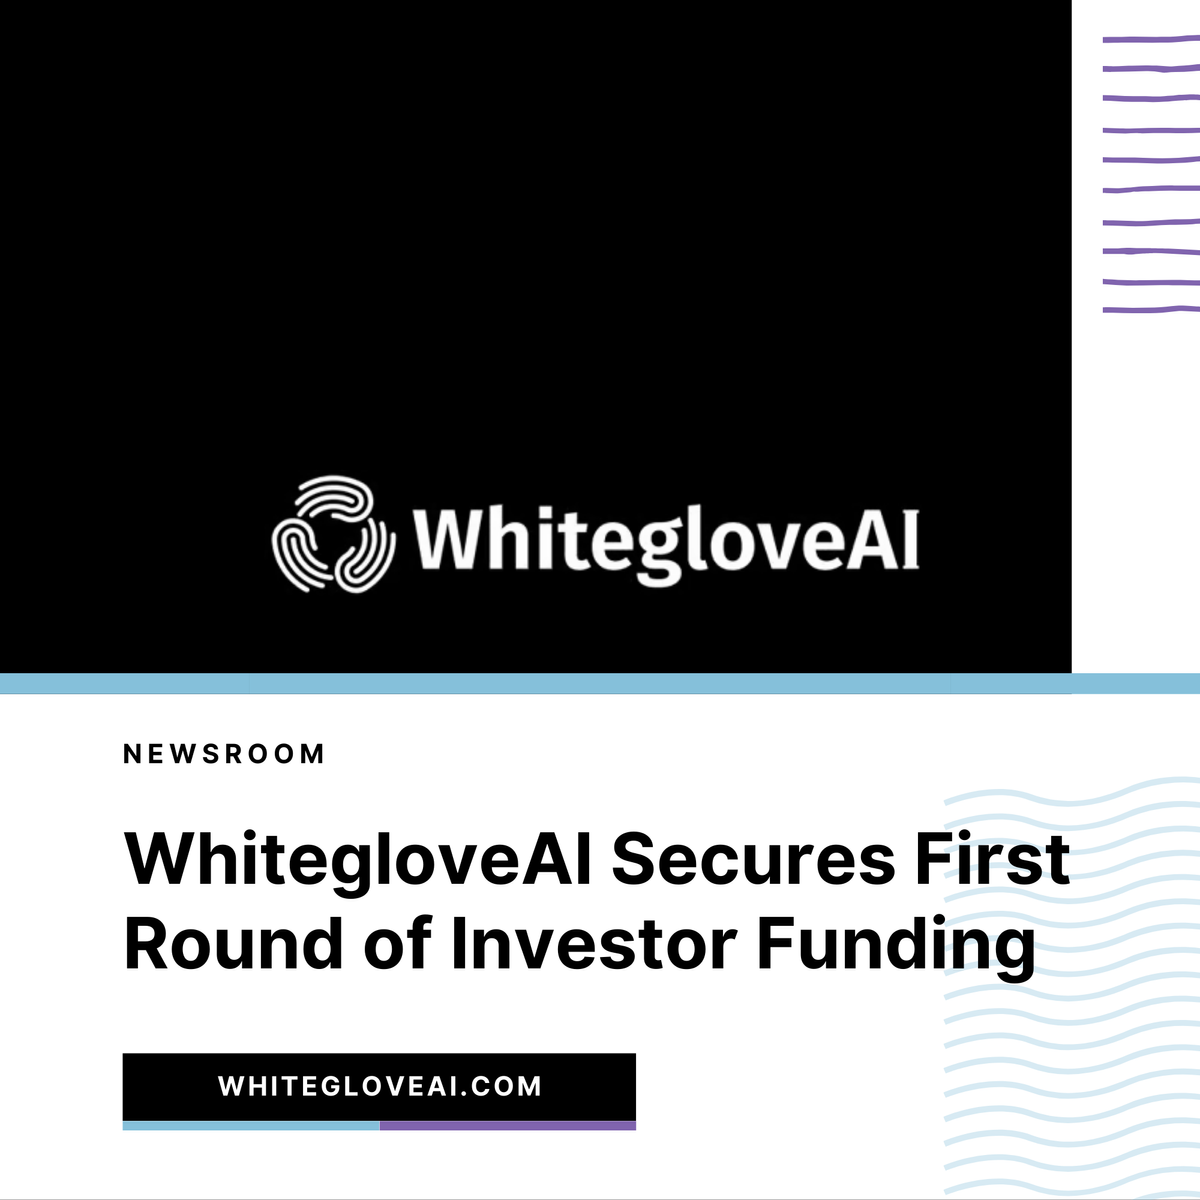 WhitegloveAI Secures First Round of Investor Funding to Propel AI Integration Services Forward